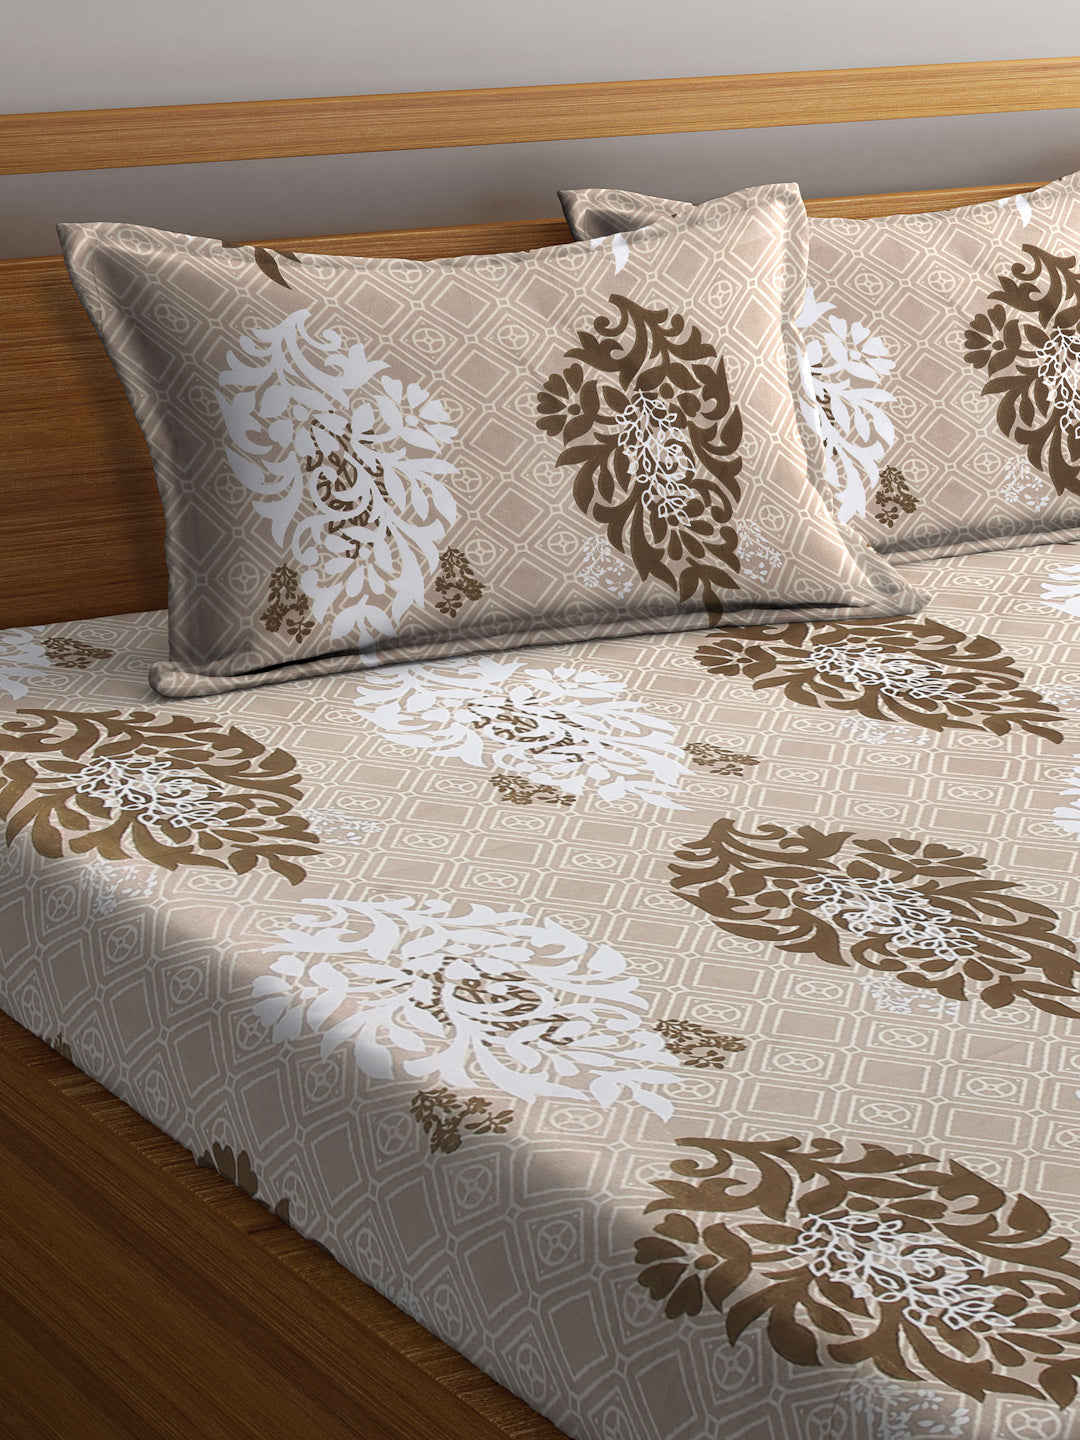 Arrabi Brown Indian TC Cotton Blend Double Size Bedsheet with 2 Pillow Covers (250 x 215 cm)